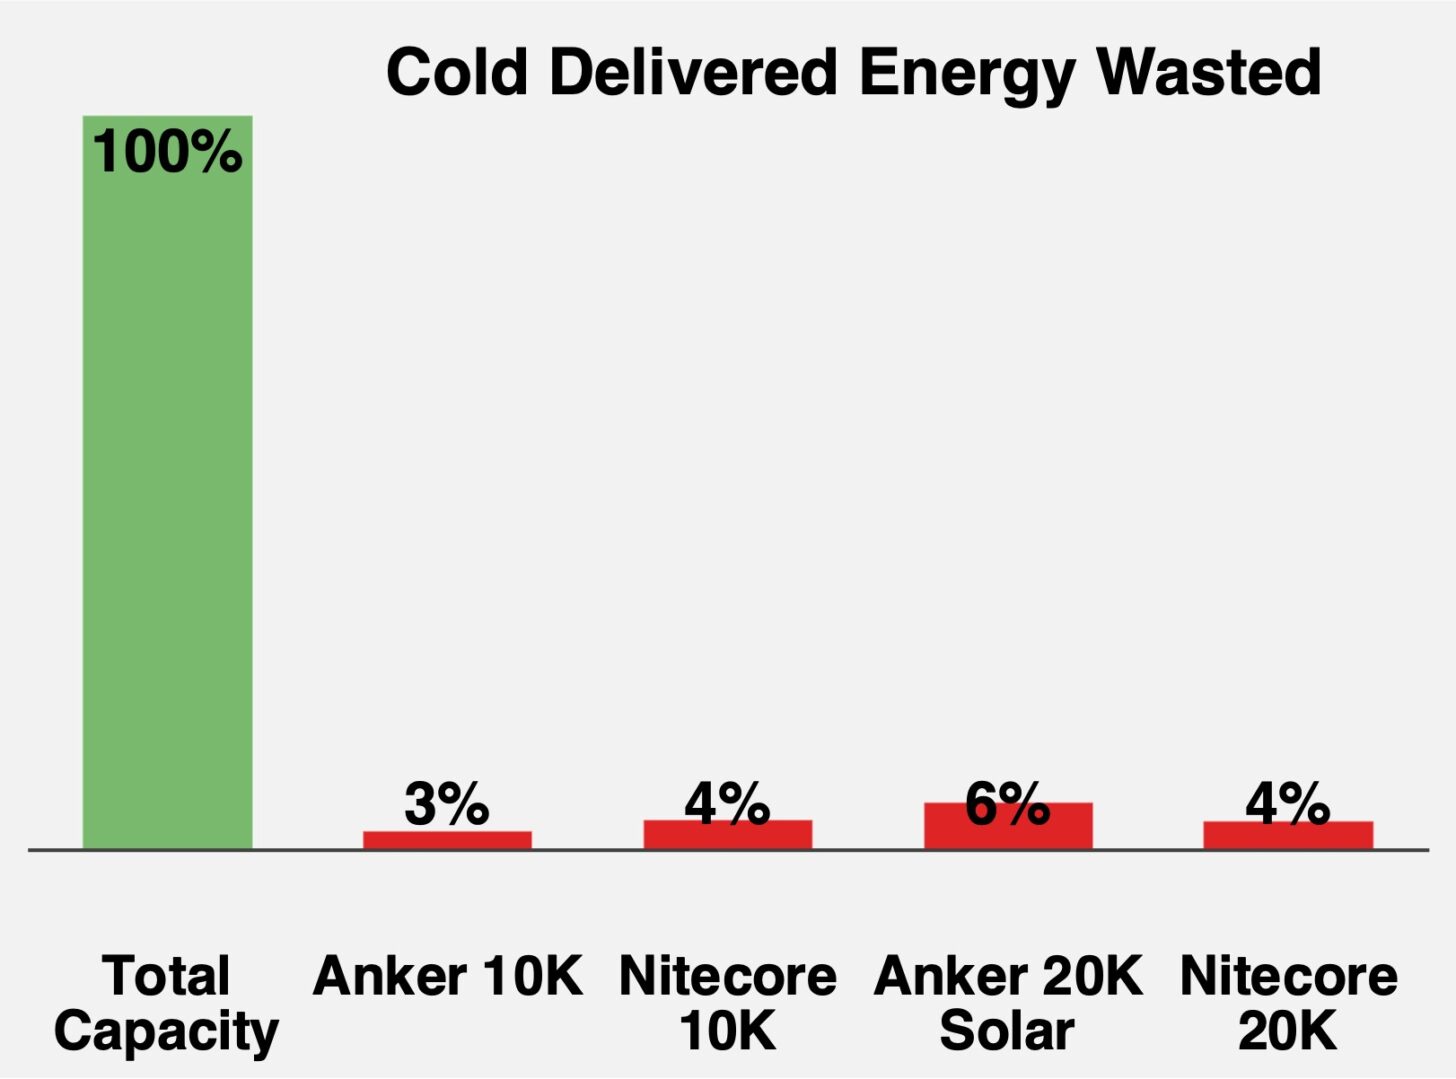 Chart comparing the delivered energy wasted in a refrigerator. Lower numbers are better.